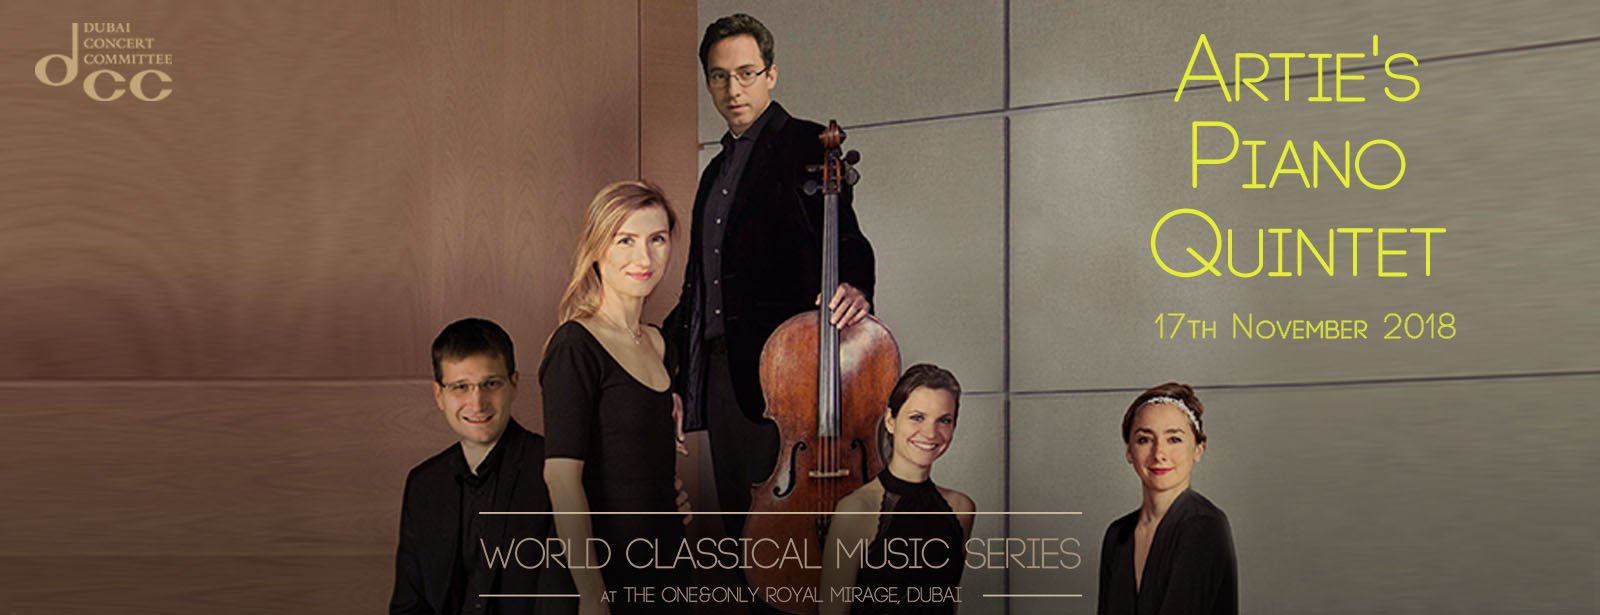 Artie’s Piano Quintet at the World Classical Music Series - Coming Soon in UAE